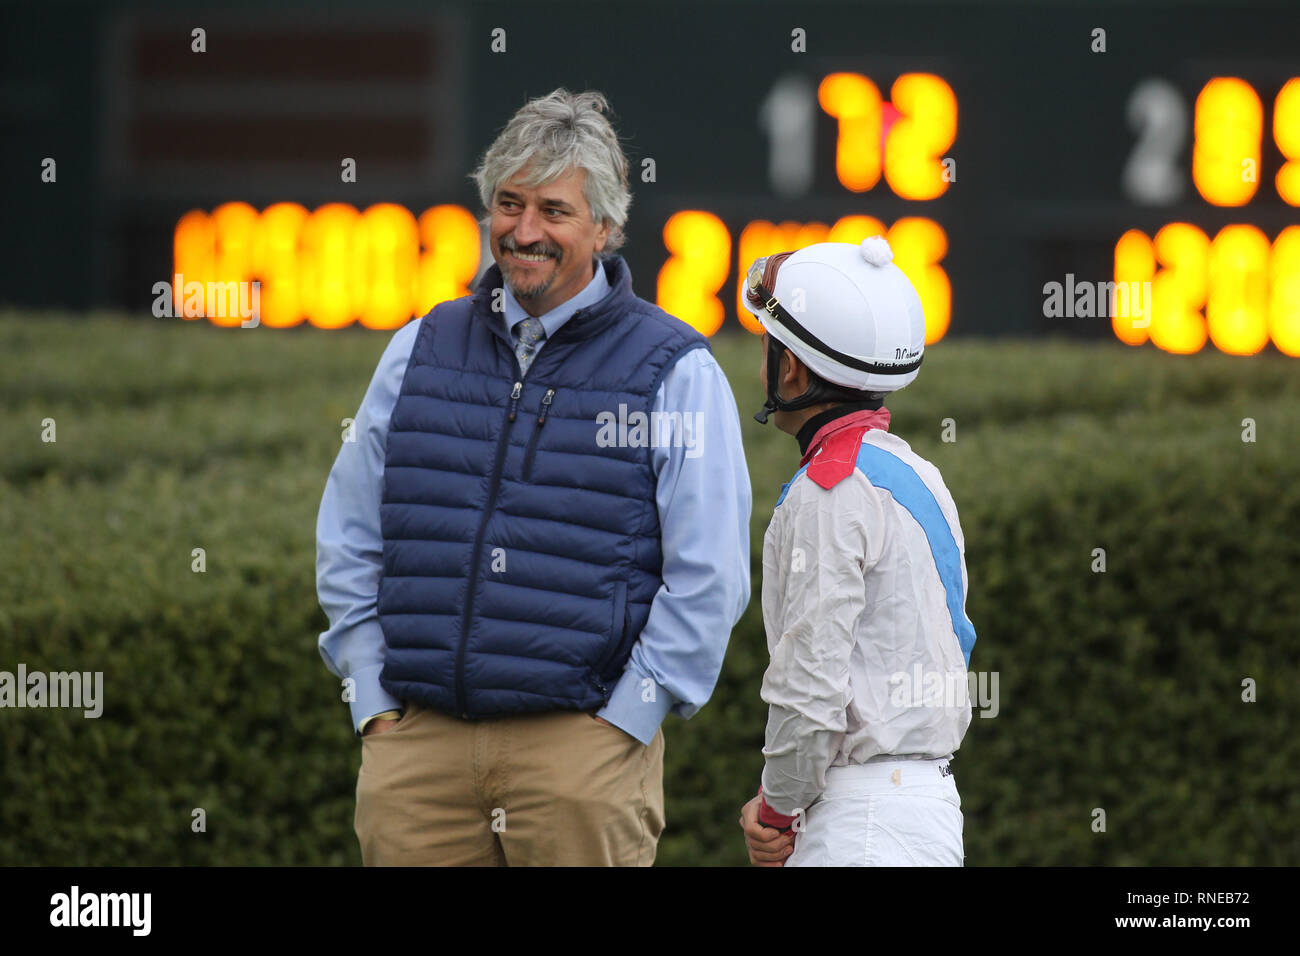 February 18, 2019 - Hot Spring, AR, U.S. - Feburary 18, 2019: Trainer Steve Asmussen talking before the running of the Southwest Stakes at Oaklawn Park in Hot Spring, AR on February 18, 2019. Â©Justin Manning/Eclipse Sportswire/CSM Stock Photo